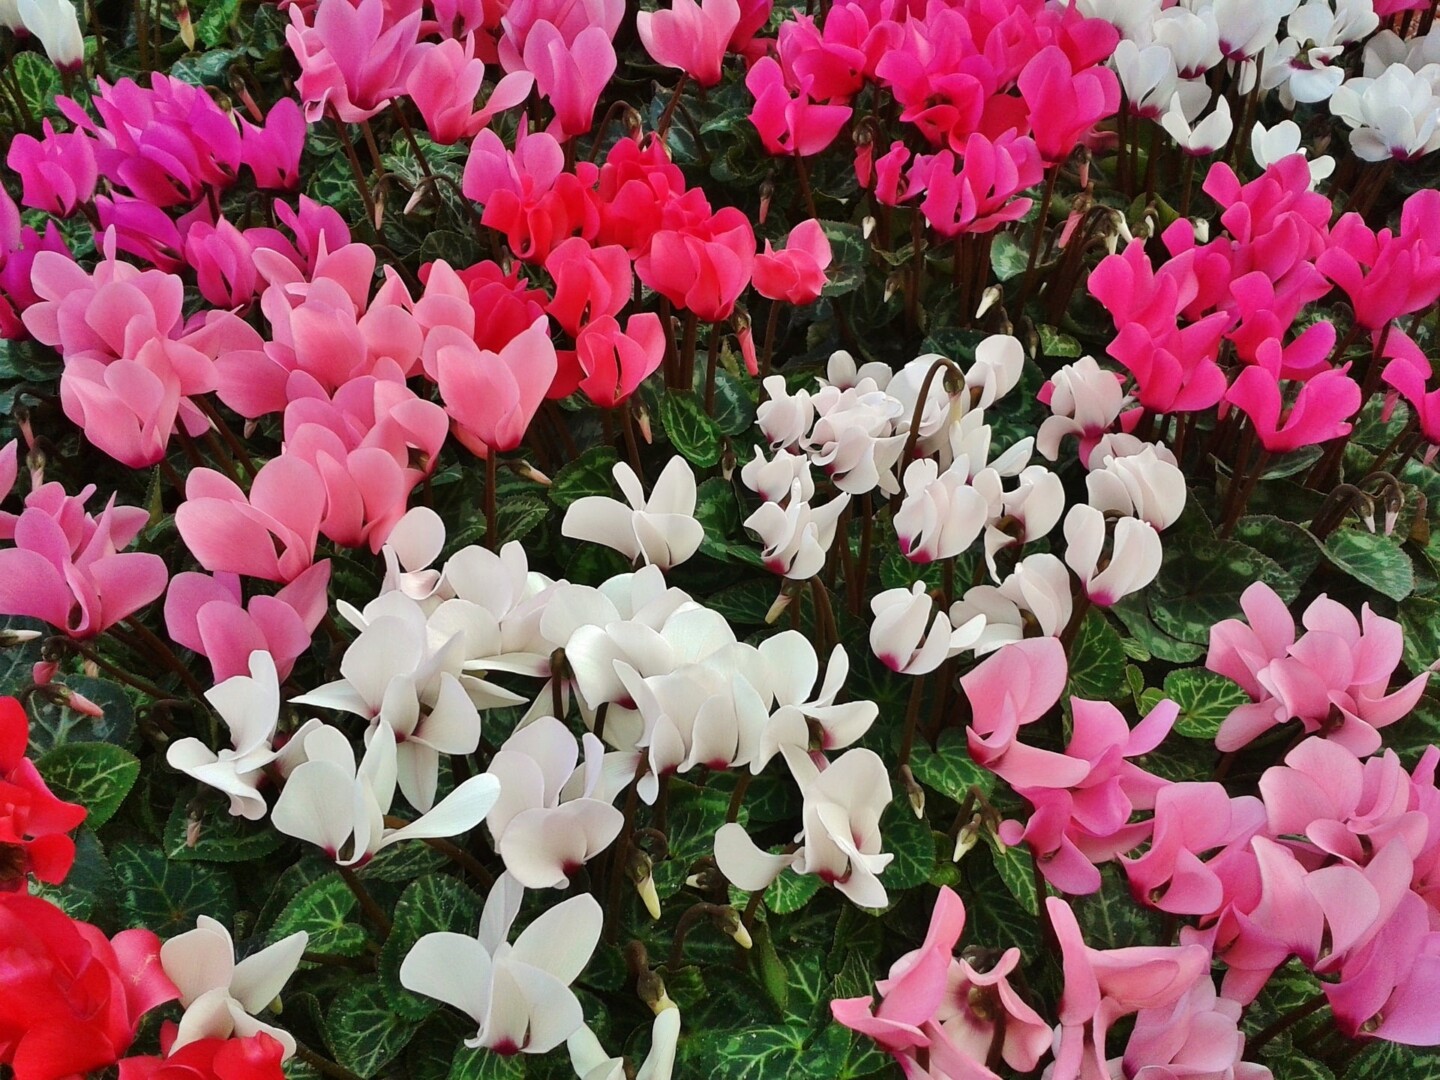 Learn how to care for holiday plants, like cyclamen